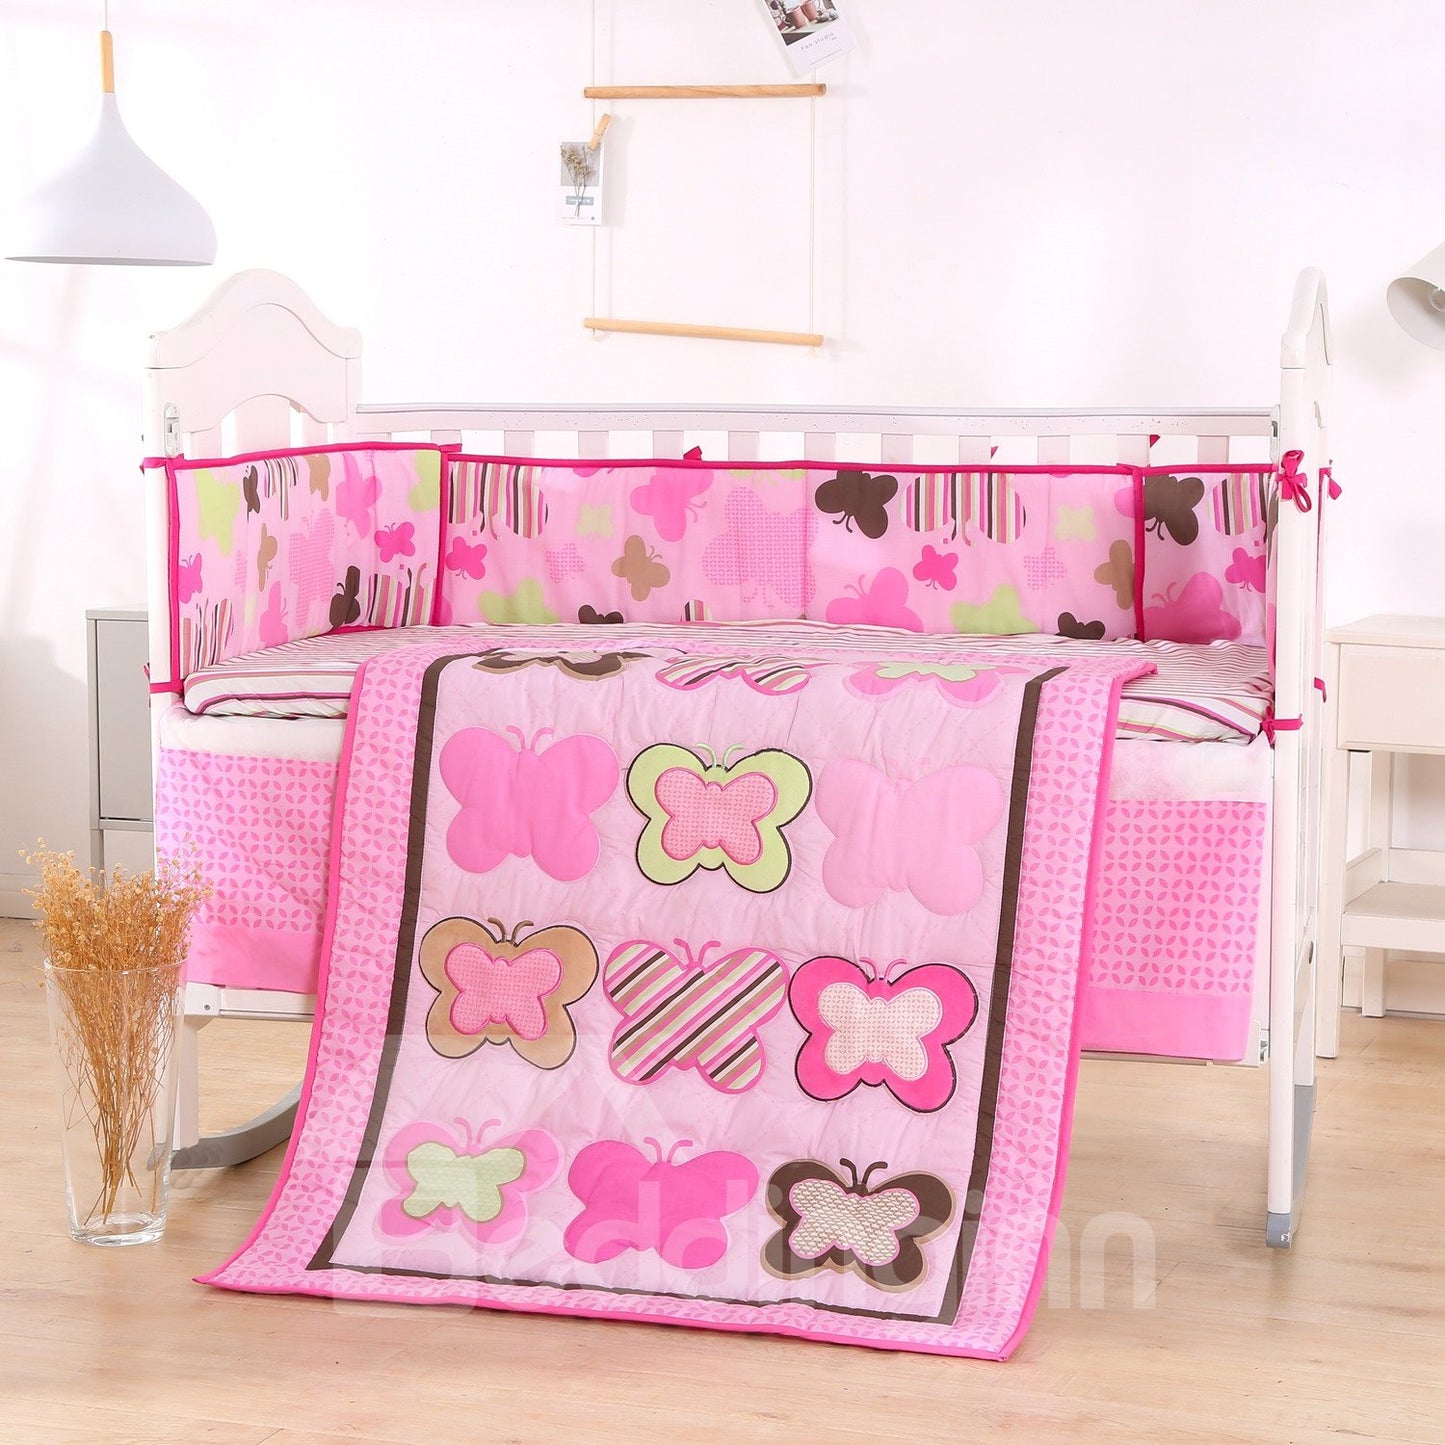 Butterfly Meadow Sweet Pink 4-Piece Crib Bedding Sets